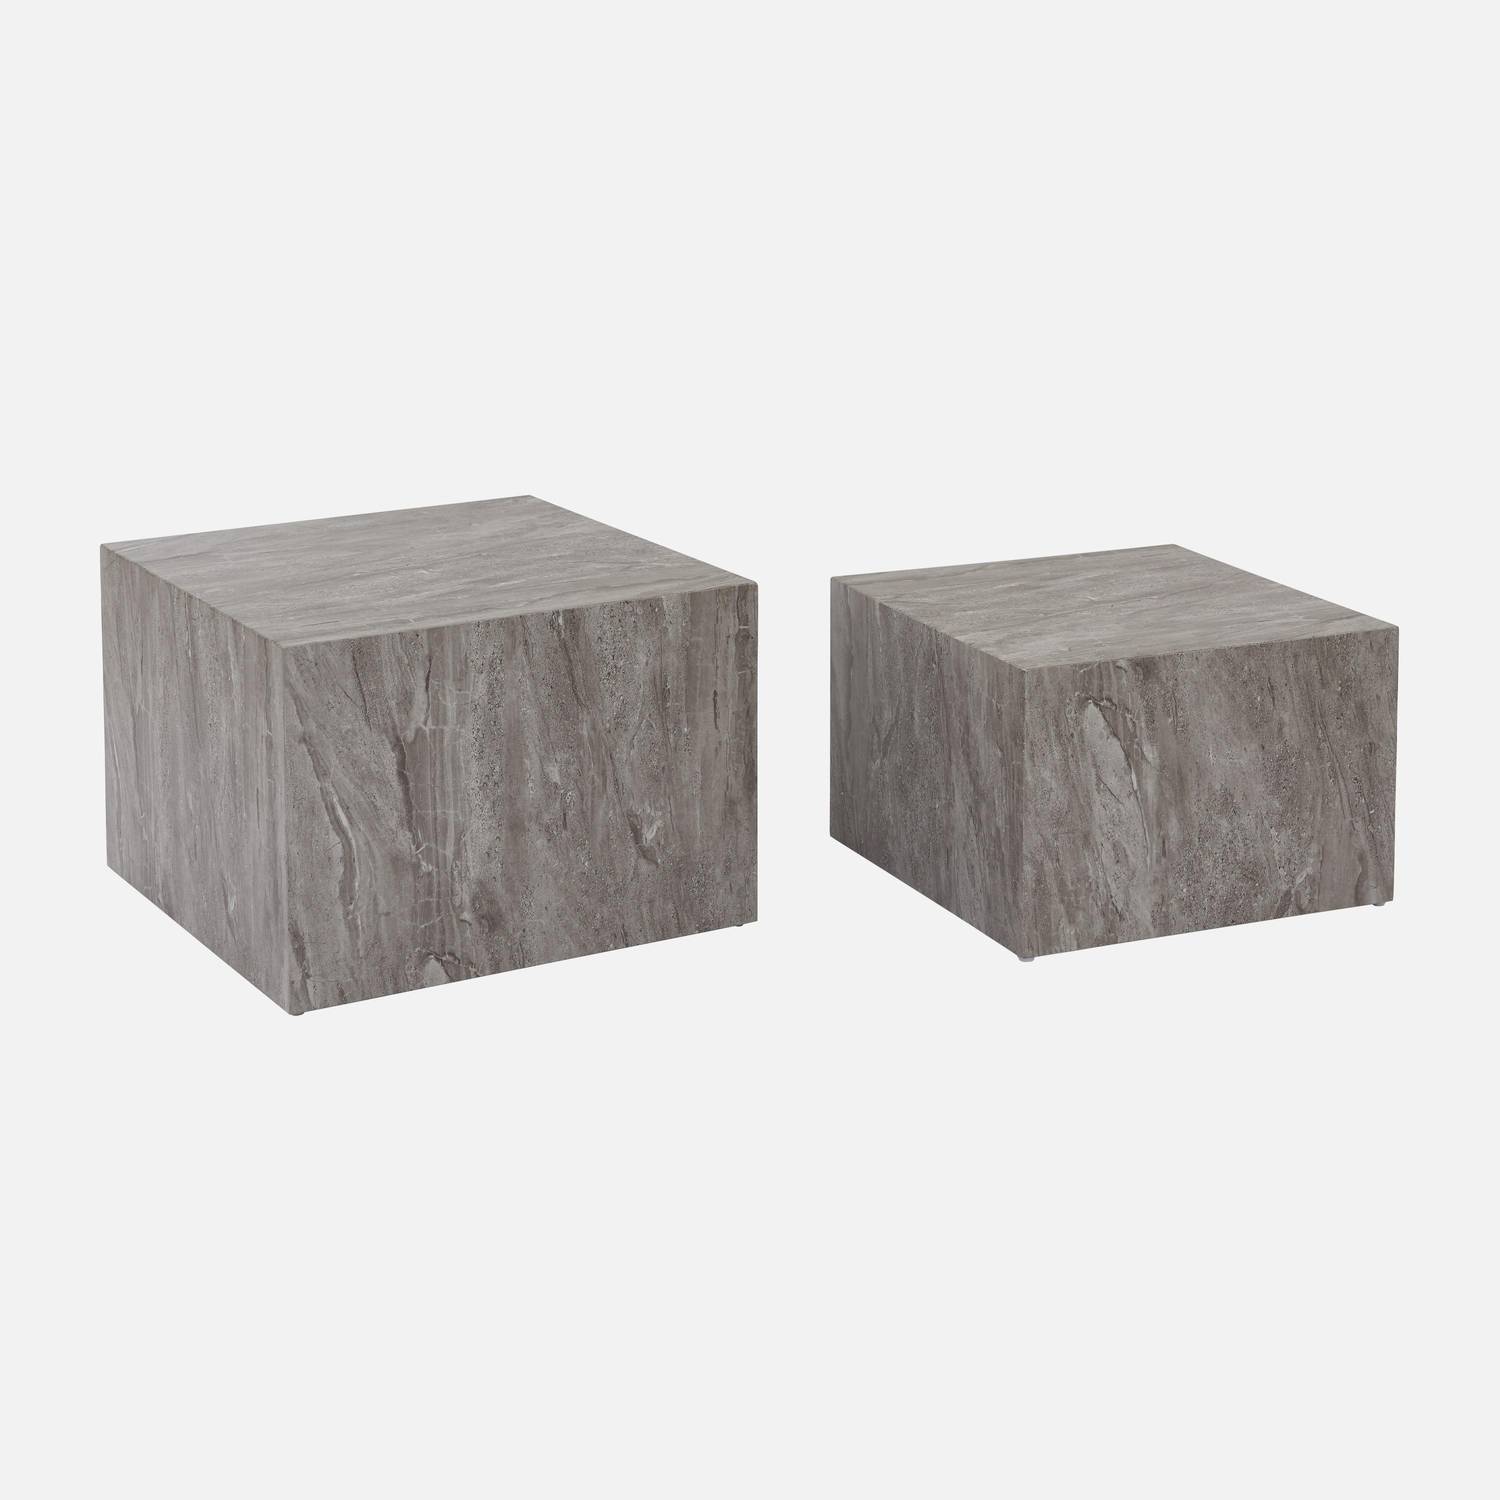 Set of 2 square coffee tables with marble effect, grey, L50xW50xH33cm &  L58xW58xH40cm, Paros Photo4